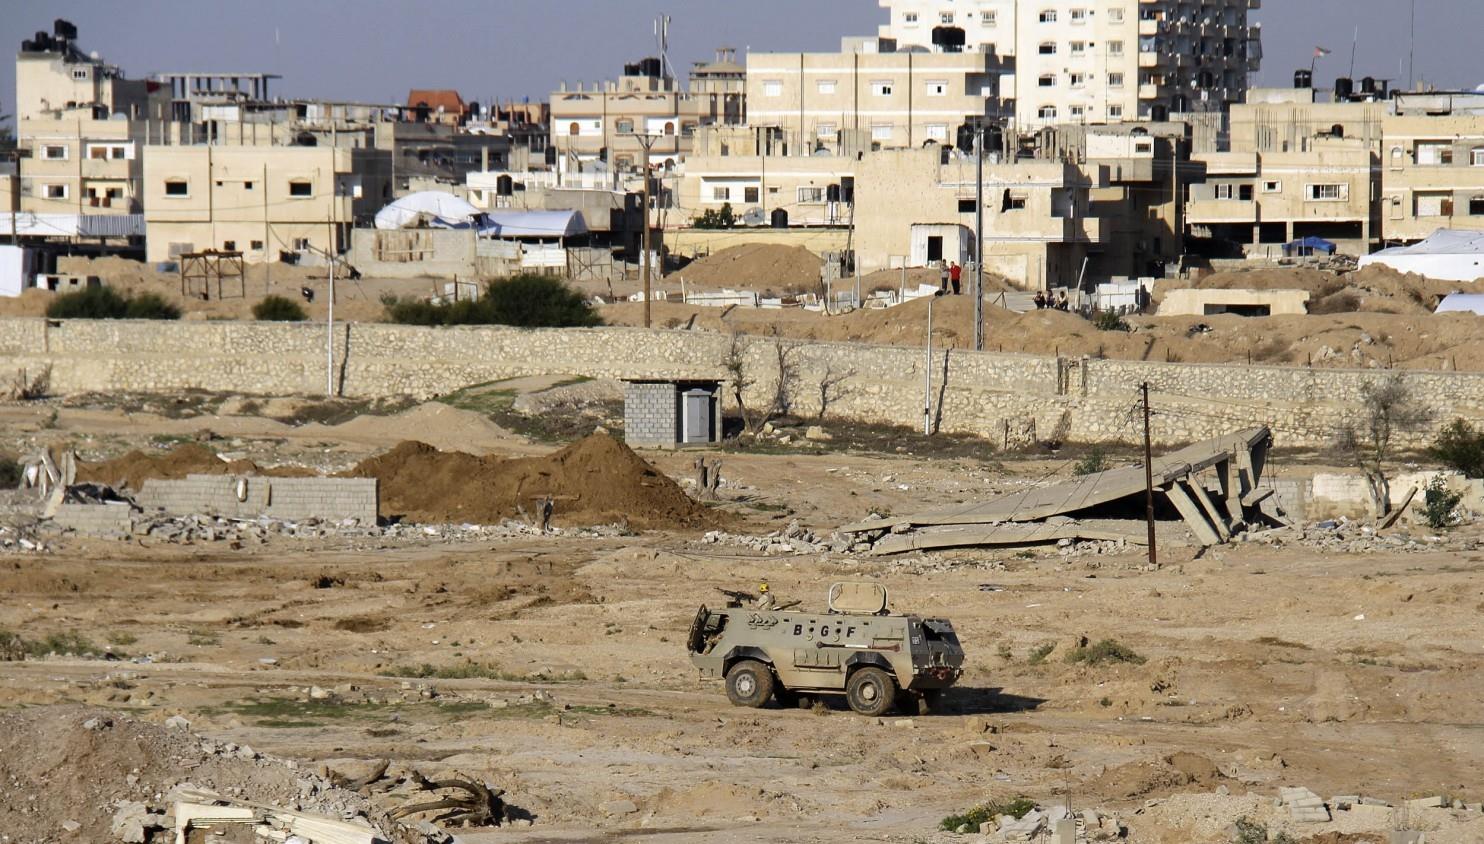 4 Hamas activists abducted in Sinai